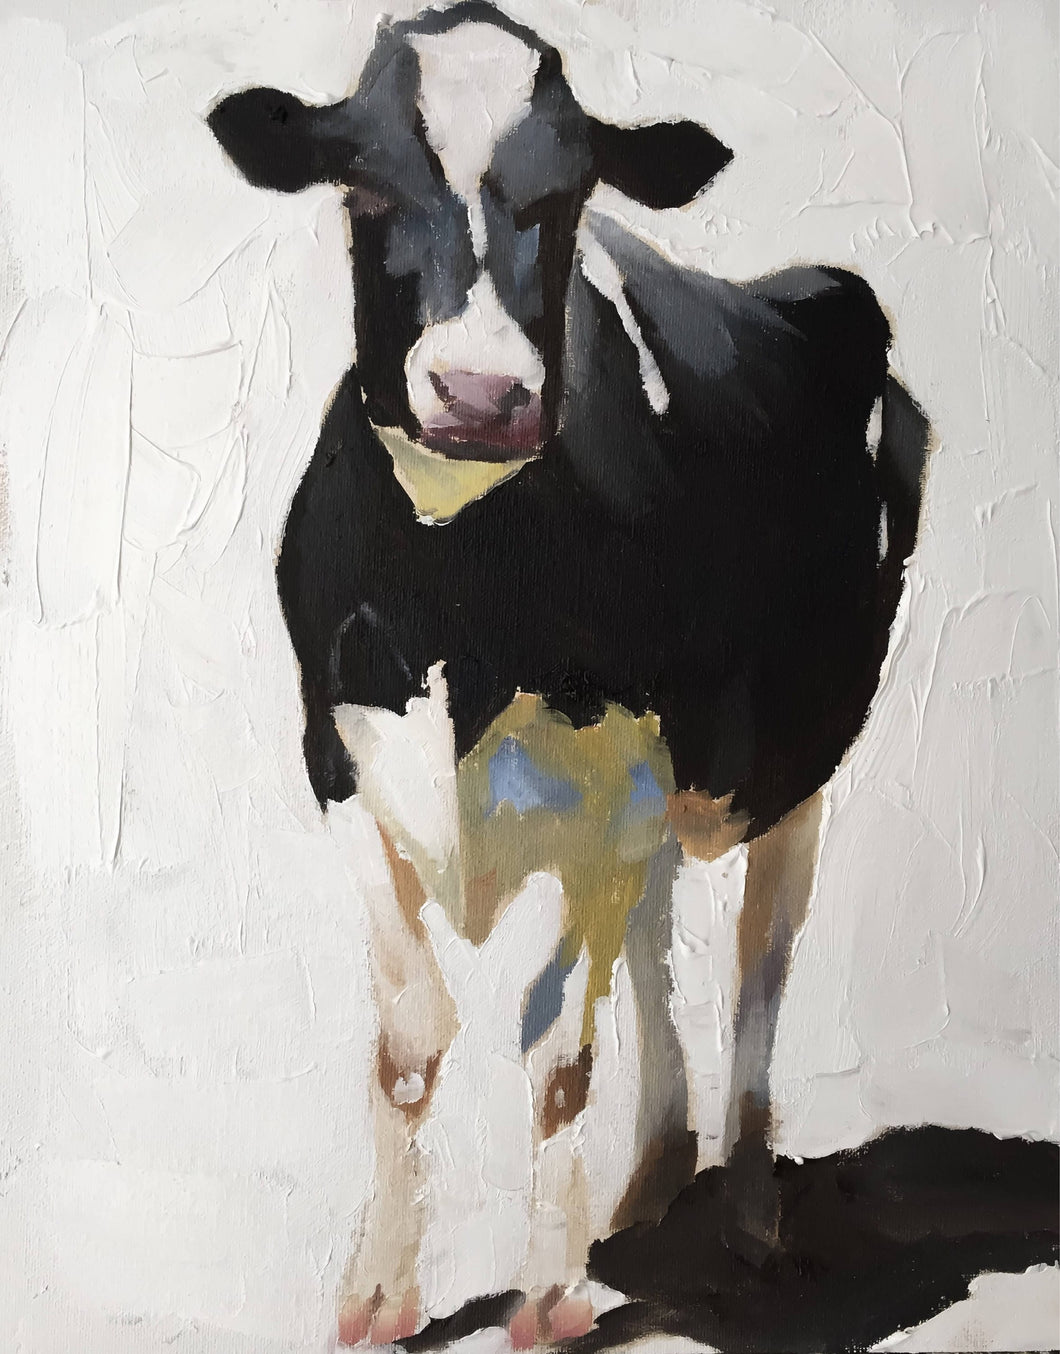 Cow Painting, PRINTS, Cow art, Canvas, Commissions, Fine Art - from original oil painting by James Coates